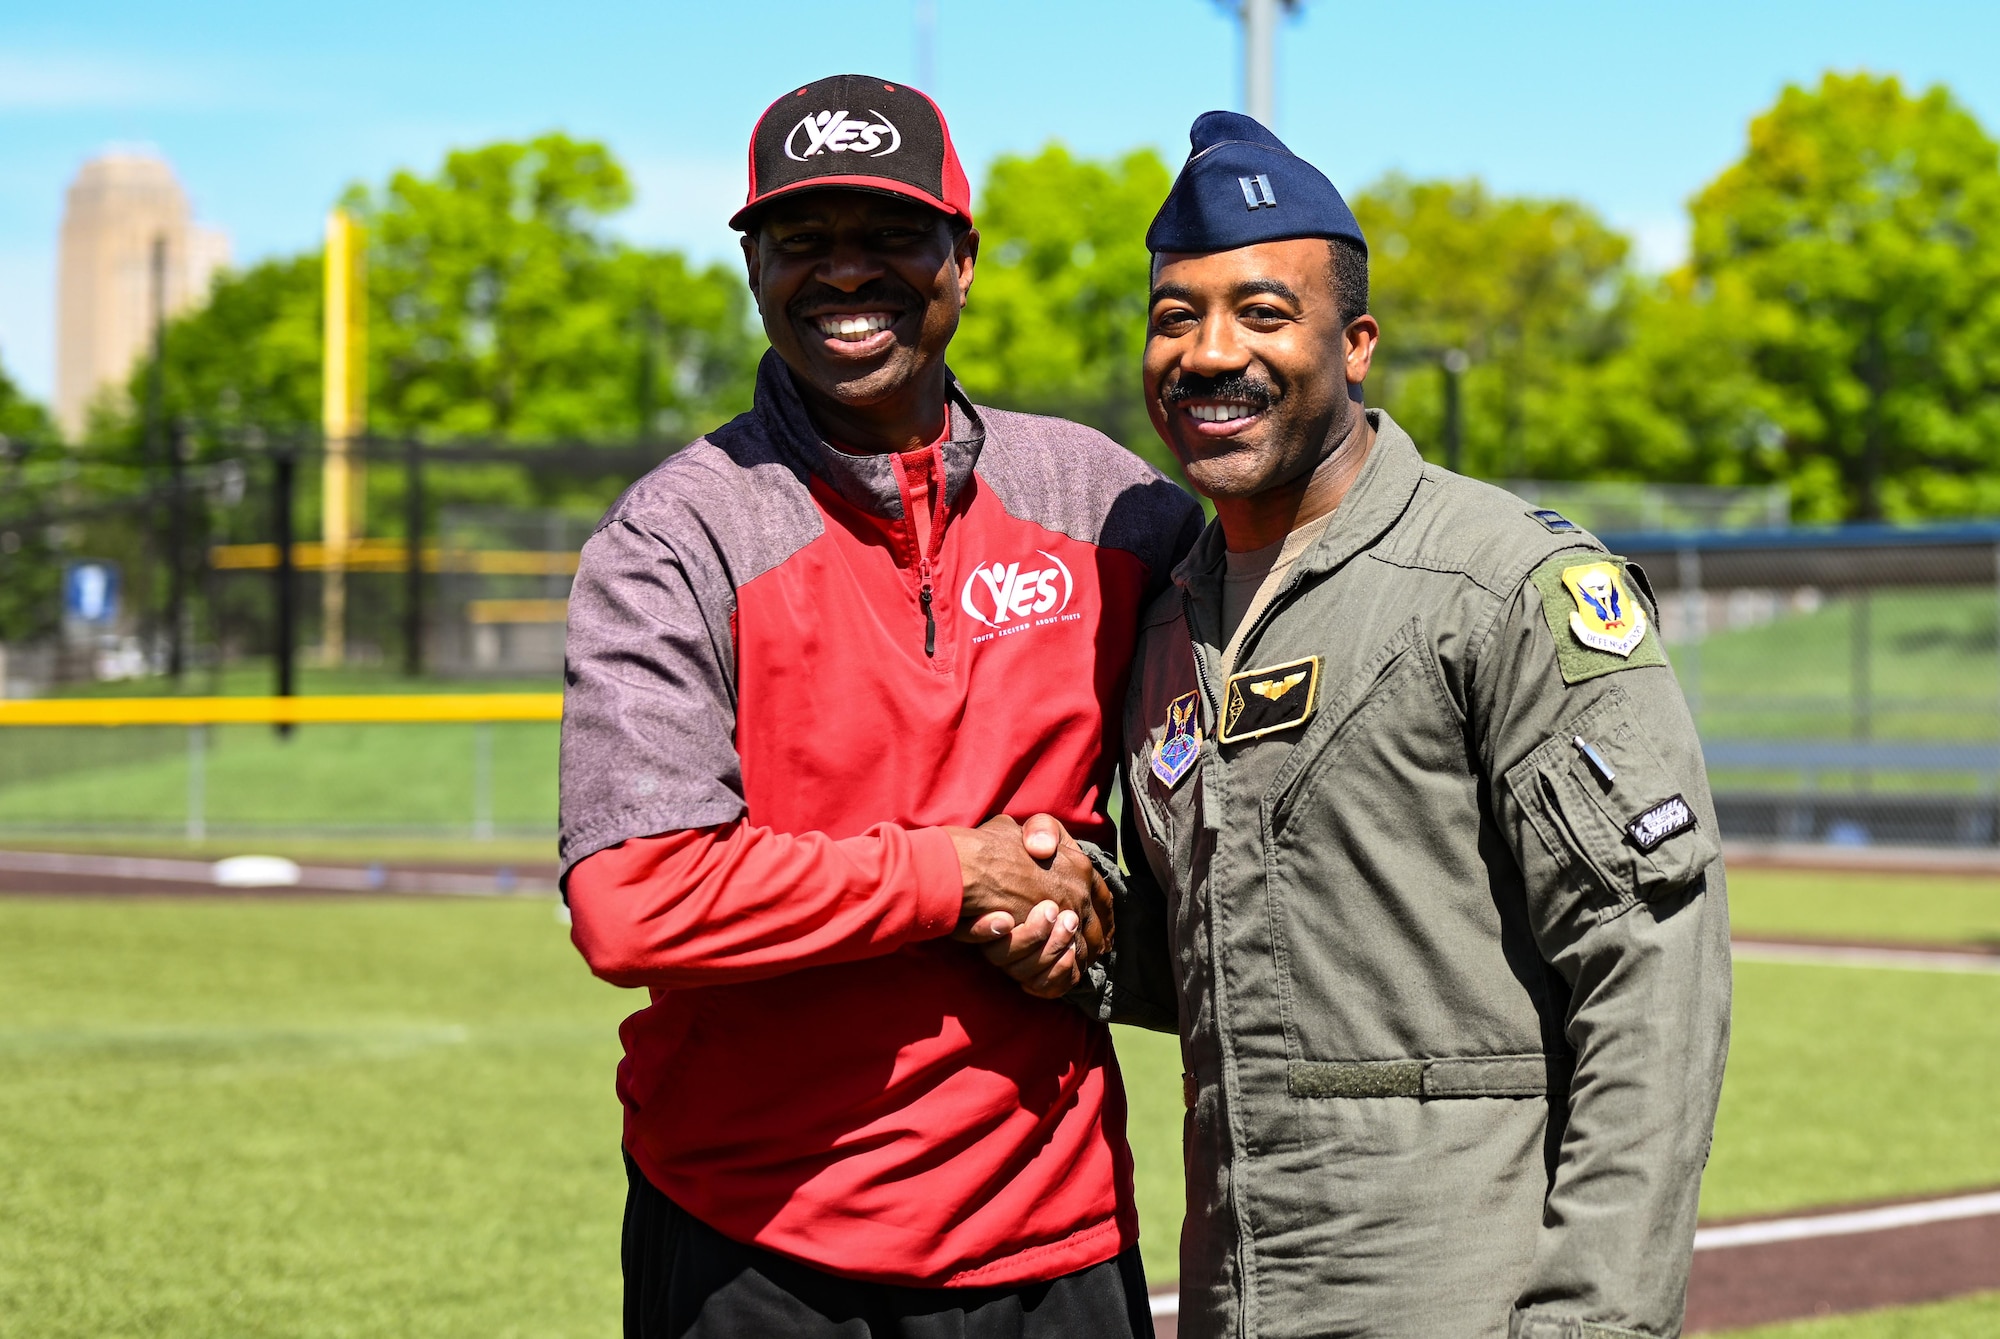 A U.S. Air Force B-2 Spirit pilot greets O.J. Rhone, Youth Excited about Sports Warrensburg director during Diversity in the Dugout at the Kansas City Royals Urban Youth Academy, Missouri, May 14, 2022. Rhone invited a pilot assigned to Whiteman to talk about hardships he faced as a young black man and overcoming negative views of diversity of those around him. This Juneteenth linked event is designed to educate kids on the importance of understanding diversity in a fun environment. (U.S. Air Force photo by Airman 1st Class Victoria Hommel)